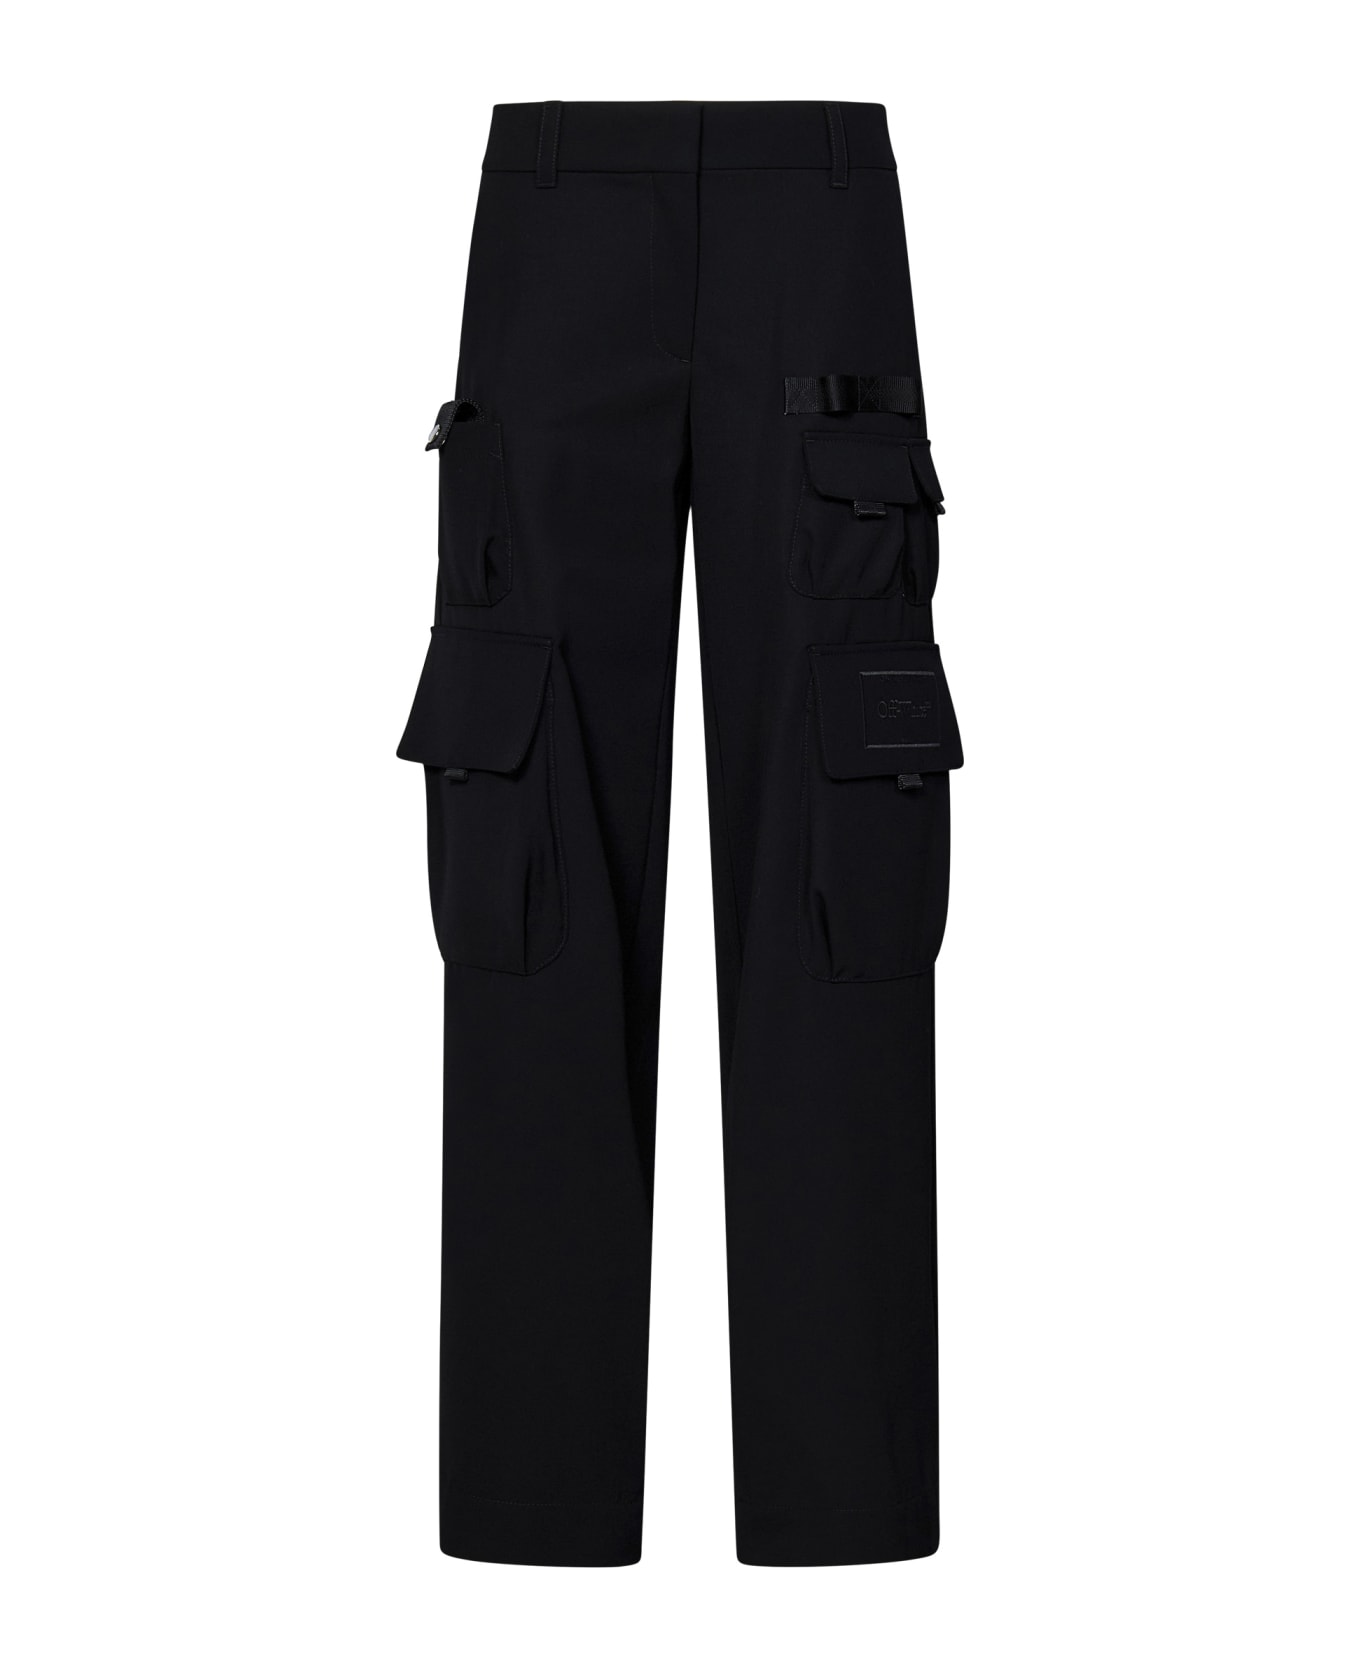 Off-White Trousers - Black ボトムス